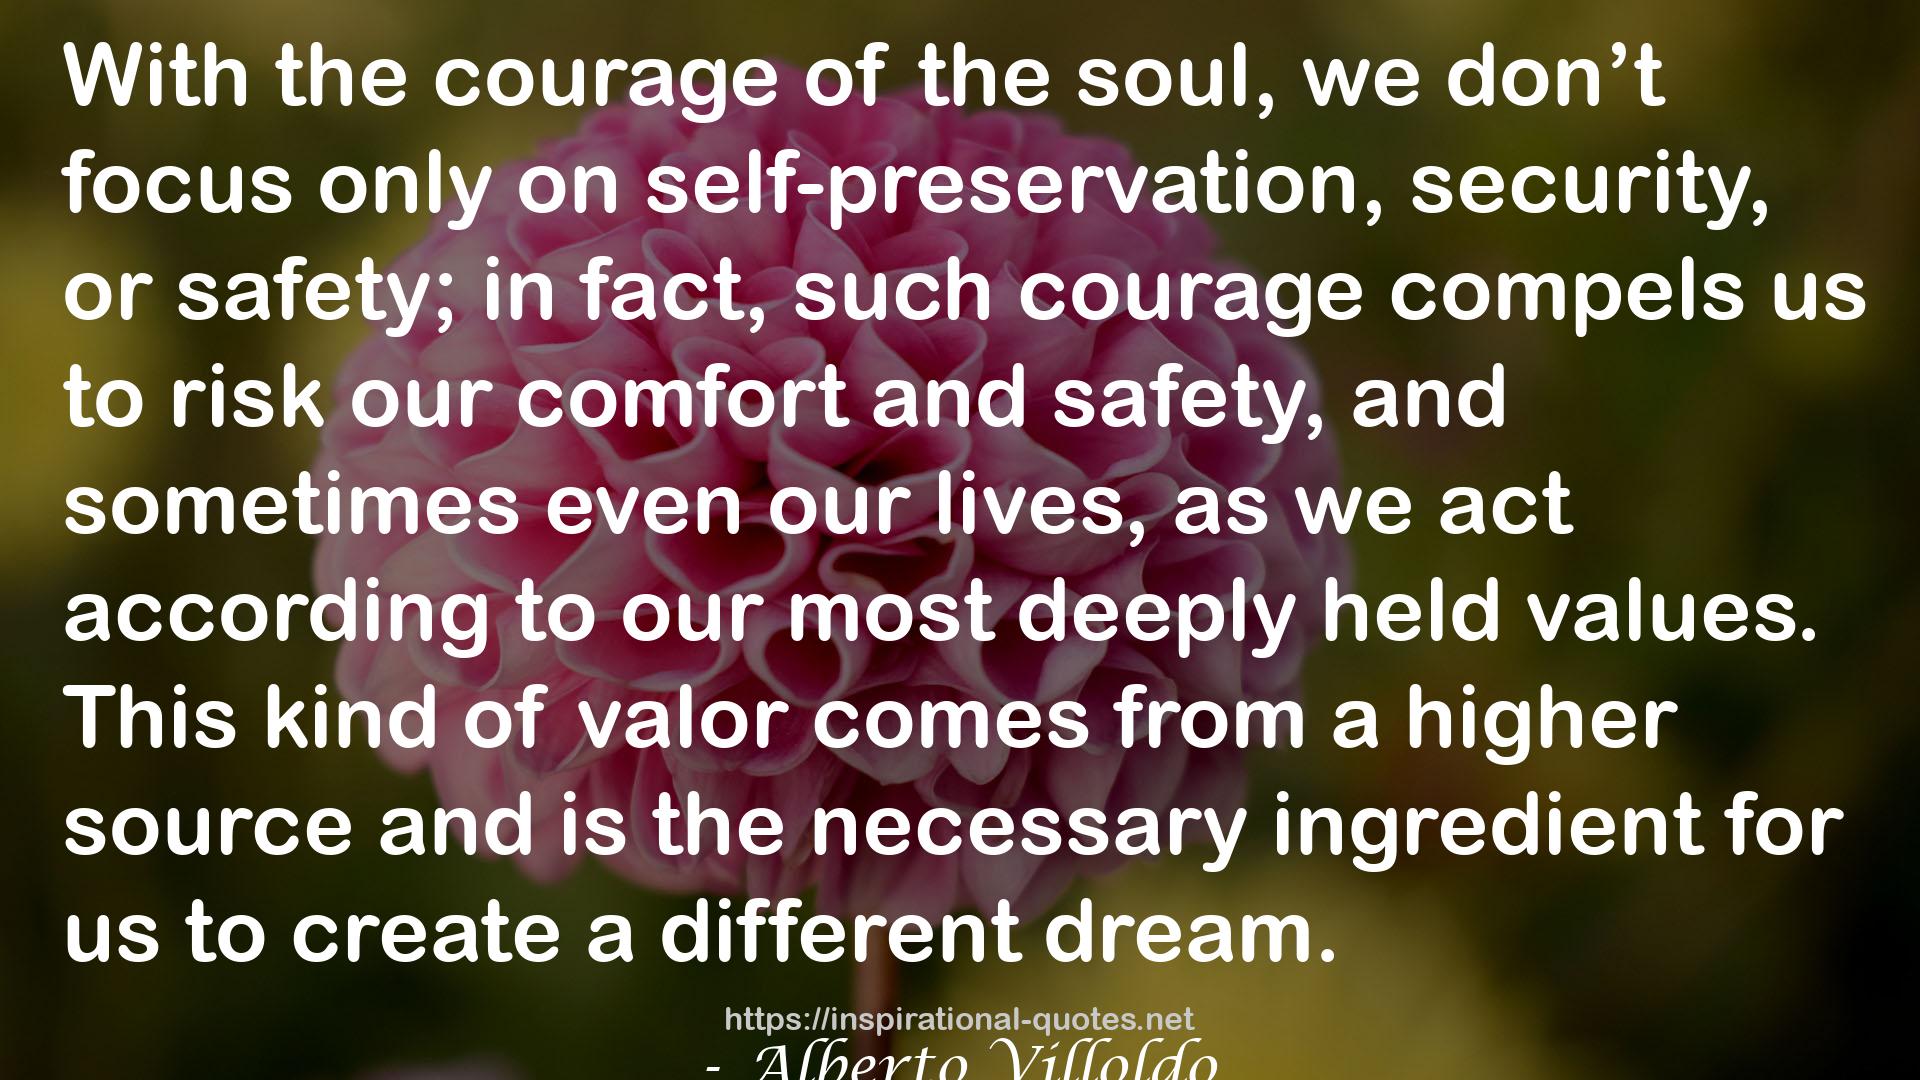 Courageous Dreaming: How Shamans Dream the World into Being QUOTES